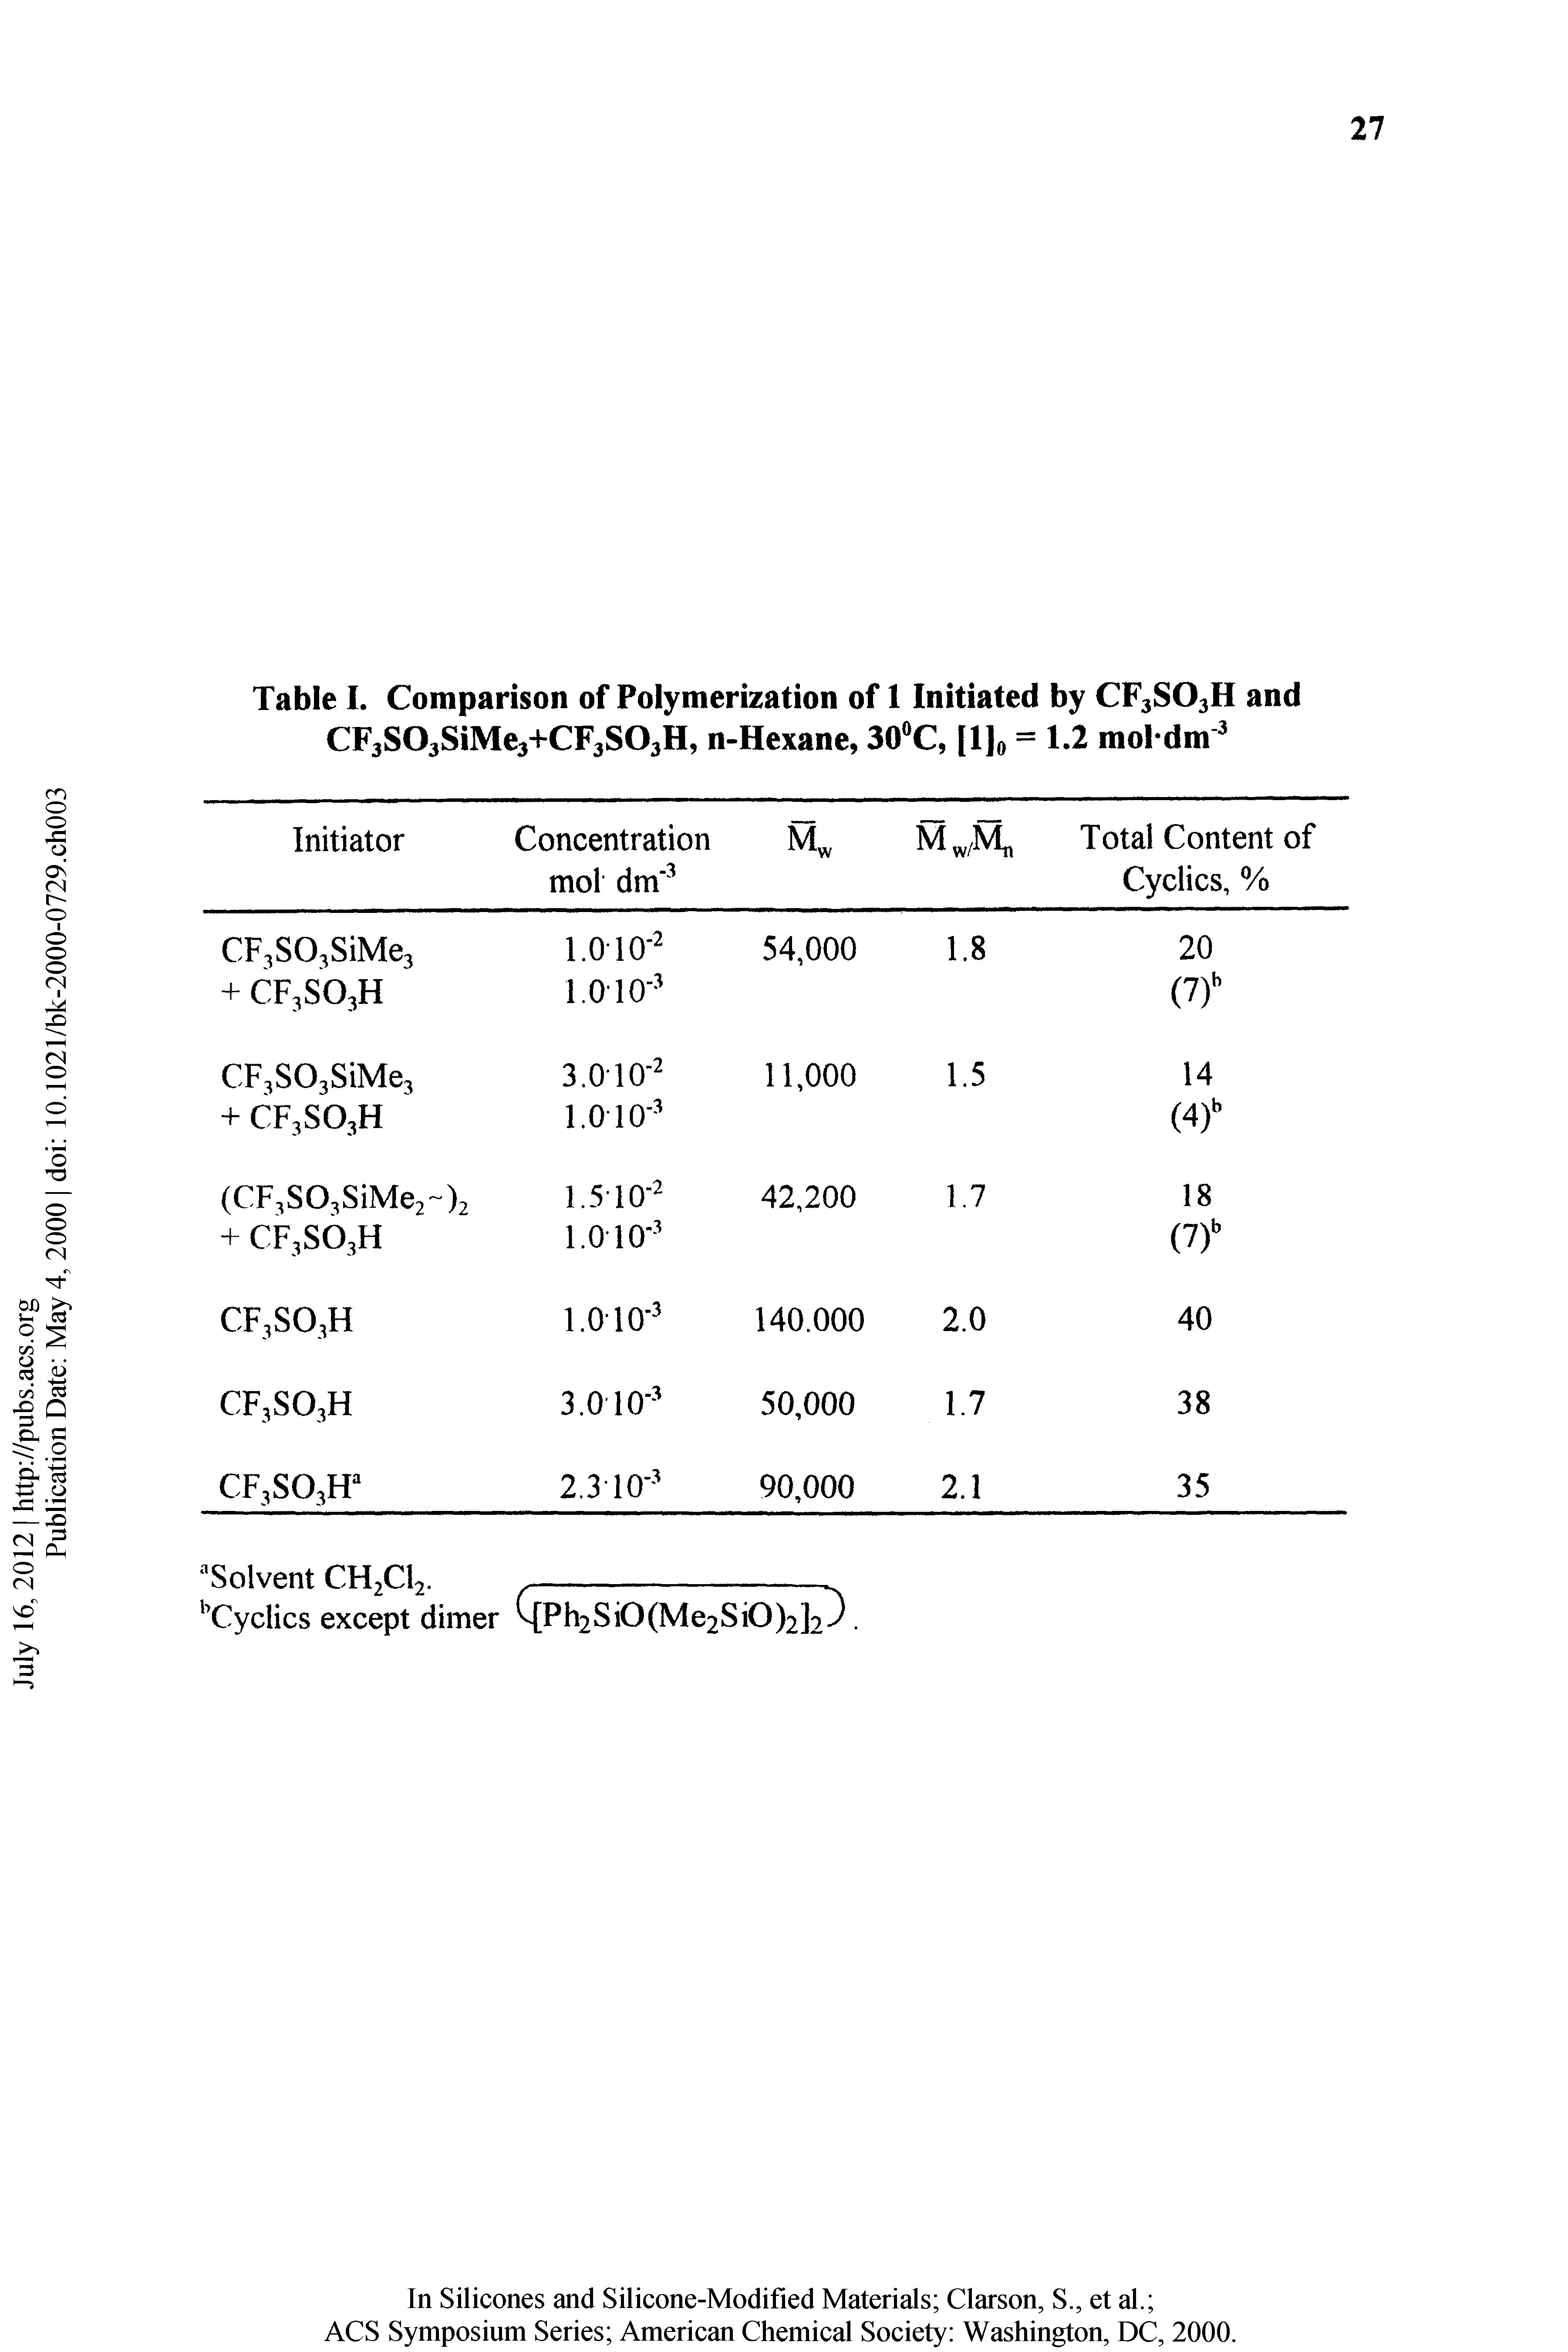 Table I. Comparison of Polymerization of 1 Initiated by CF3SO3H and CF3S03SiMe3+CF3S03H, n-Hexane, 30 C, [l)o = 1.2 mol dm ...